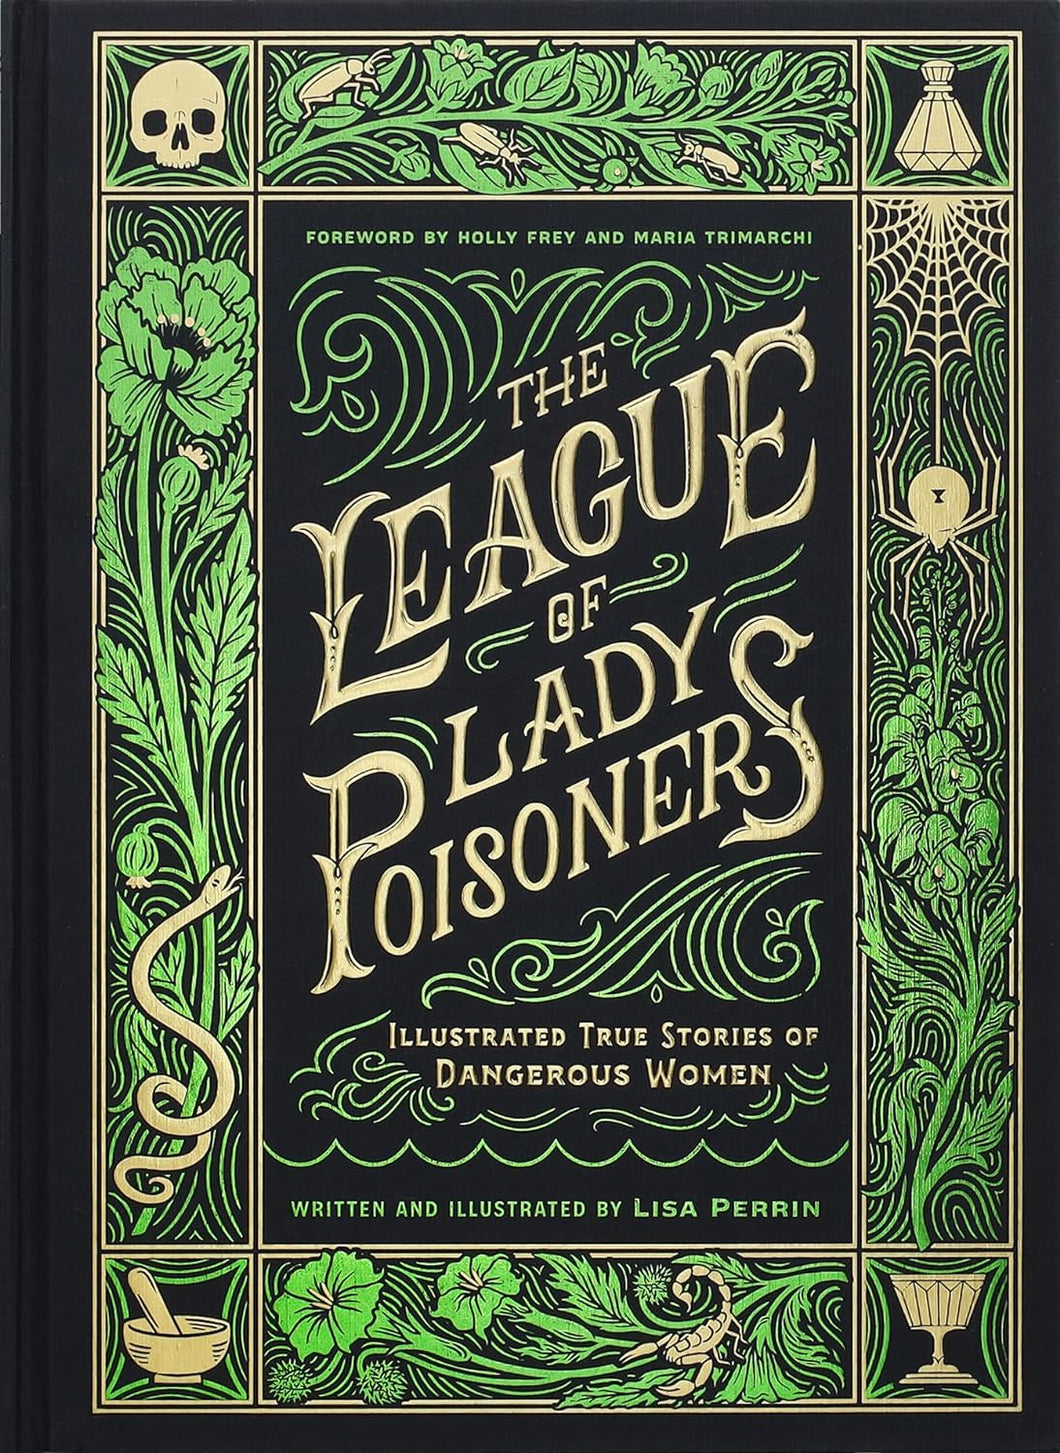 The League of Lady Poisoners Illustrated True Stories of Dangerous Women by Lisa Perrin